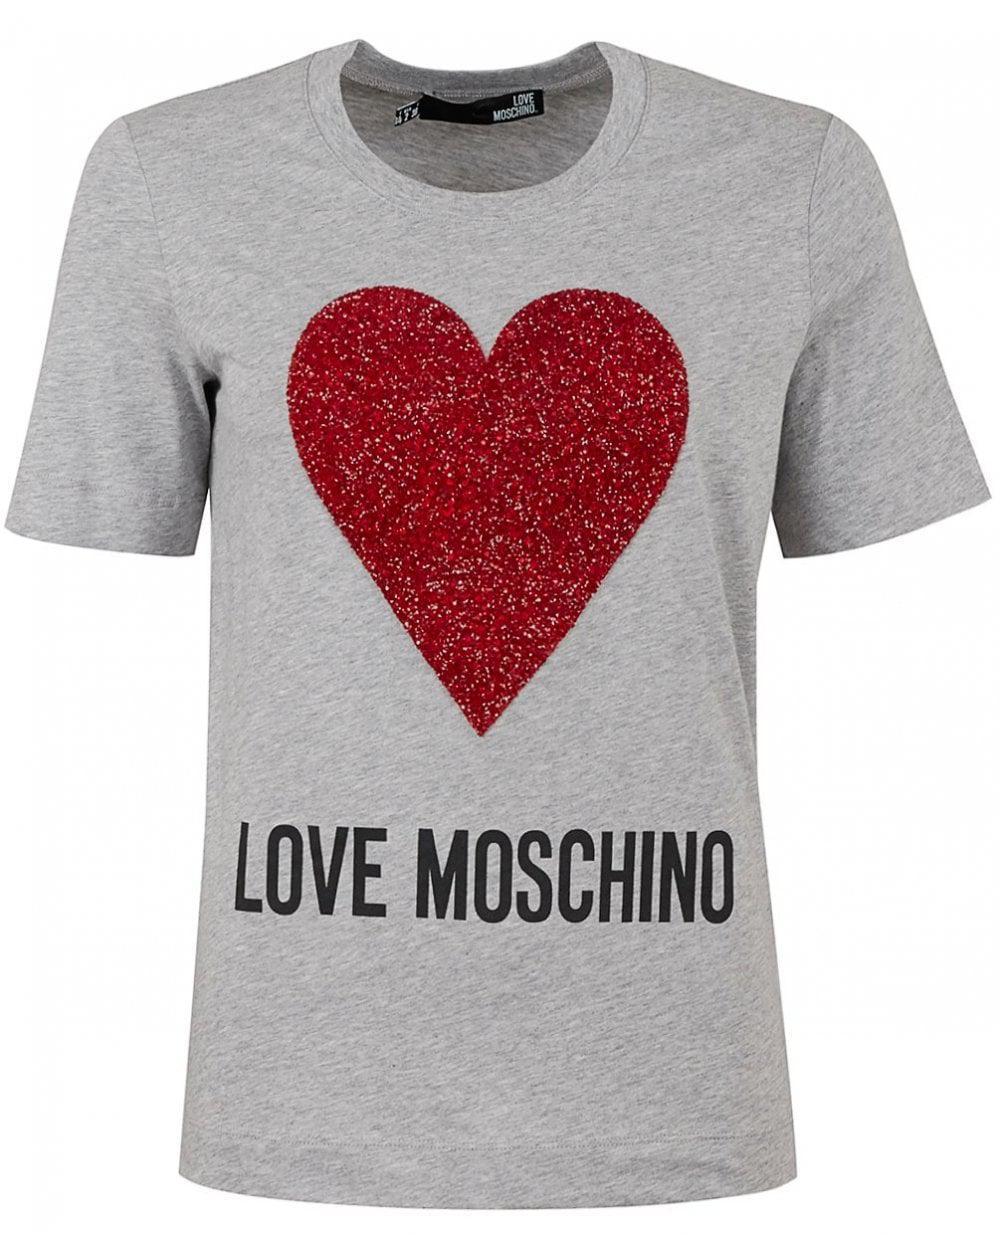 Gray and Red Heart Logo - Love Moschino Sparkle Heart Logo in Gray